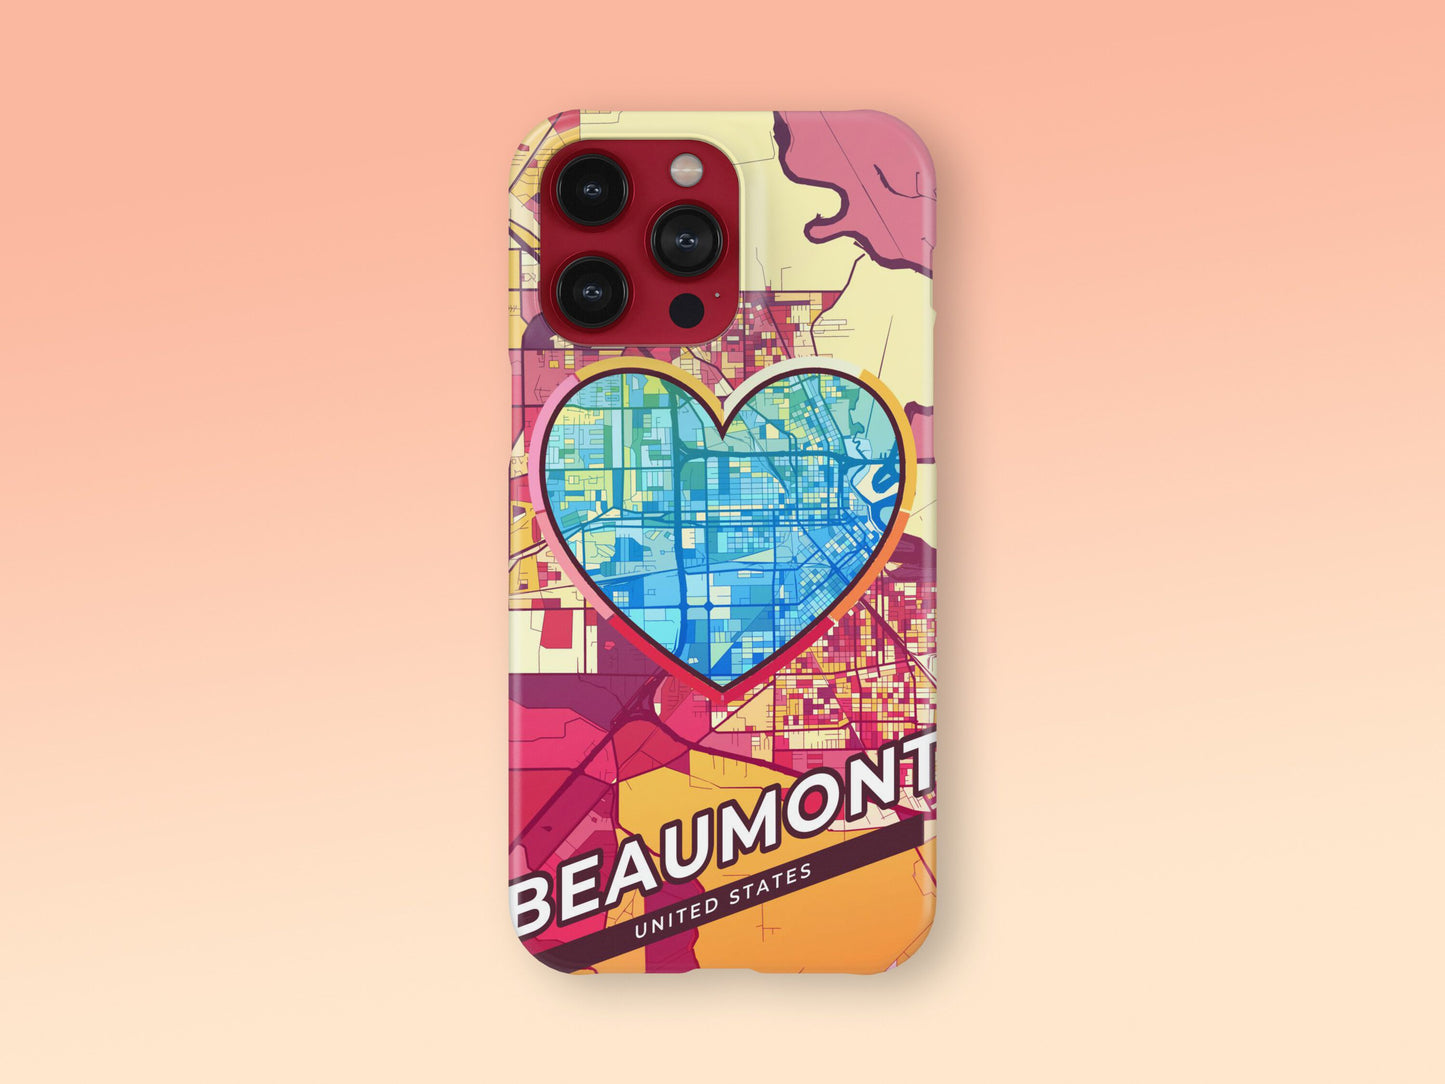 Beaumont Texas slim phone case with colorful icon. Birthday, wedding or housewarming gift. Couple match cases. 2